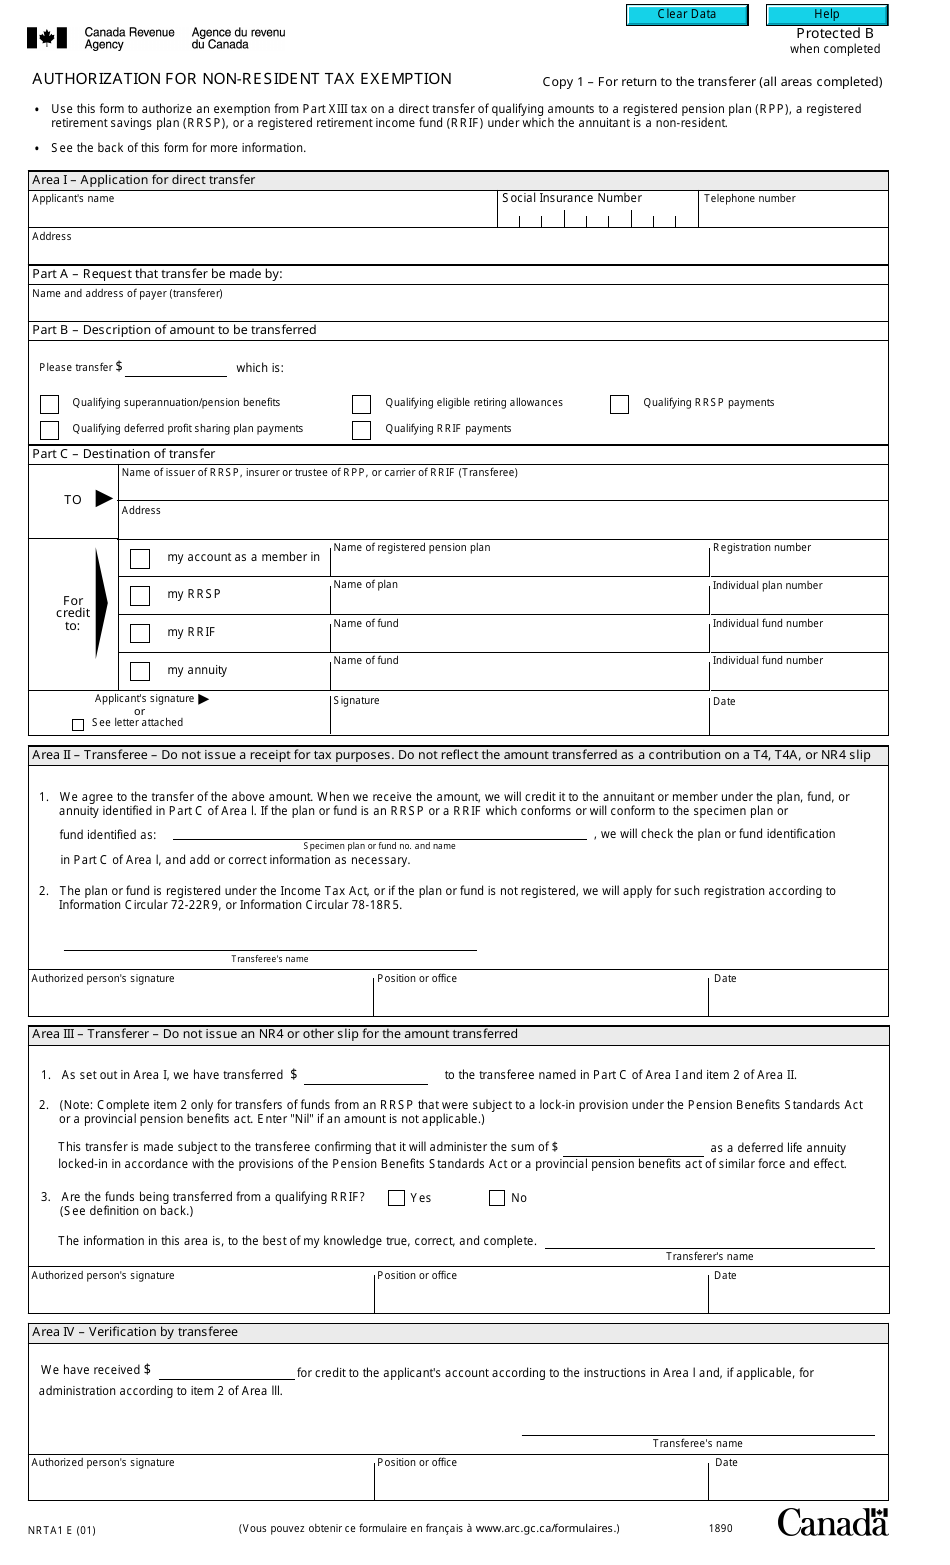 Form NRTA1 Authorization for Non-resident Tax Exemption - Canada, Page 1